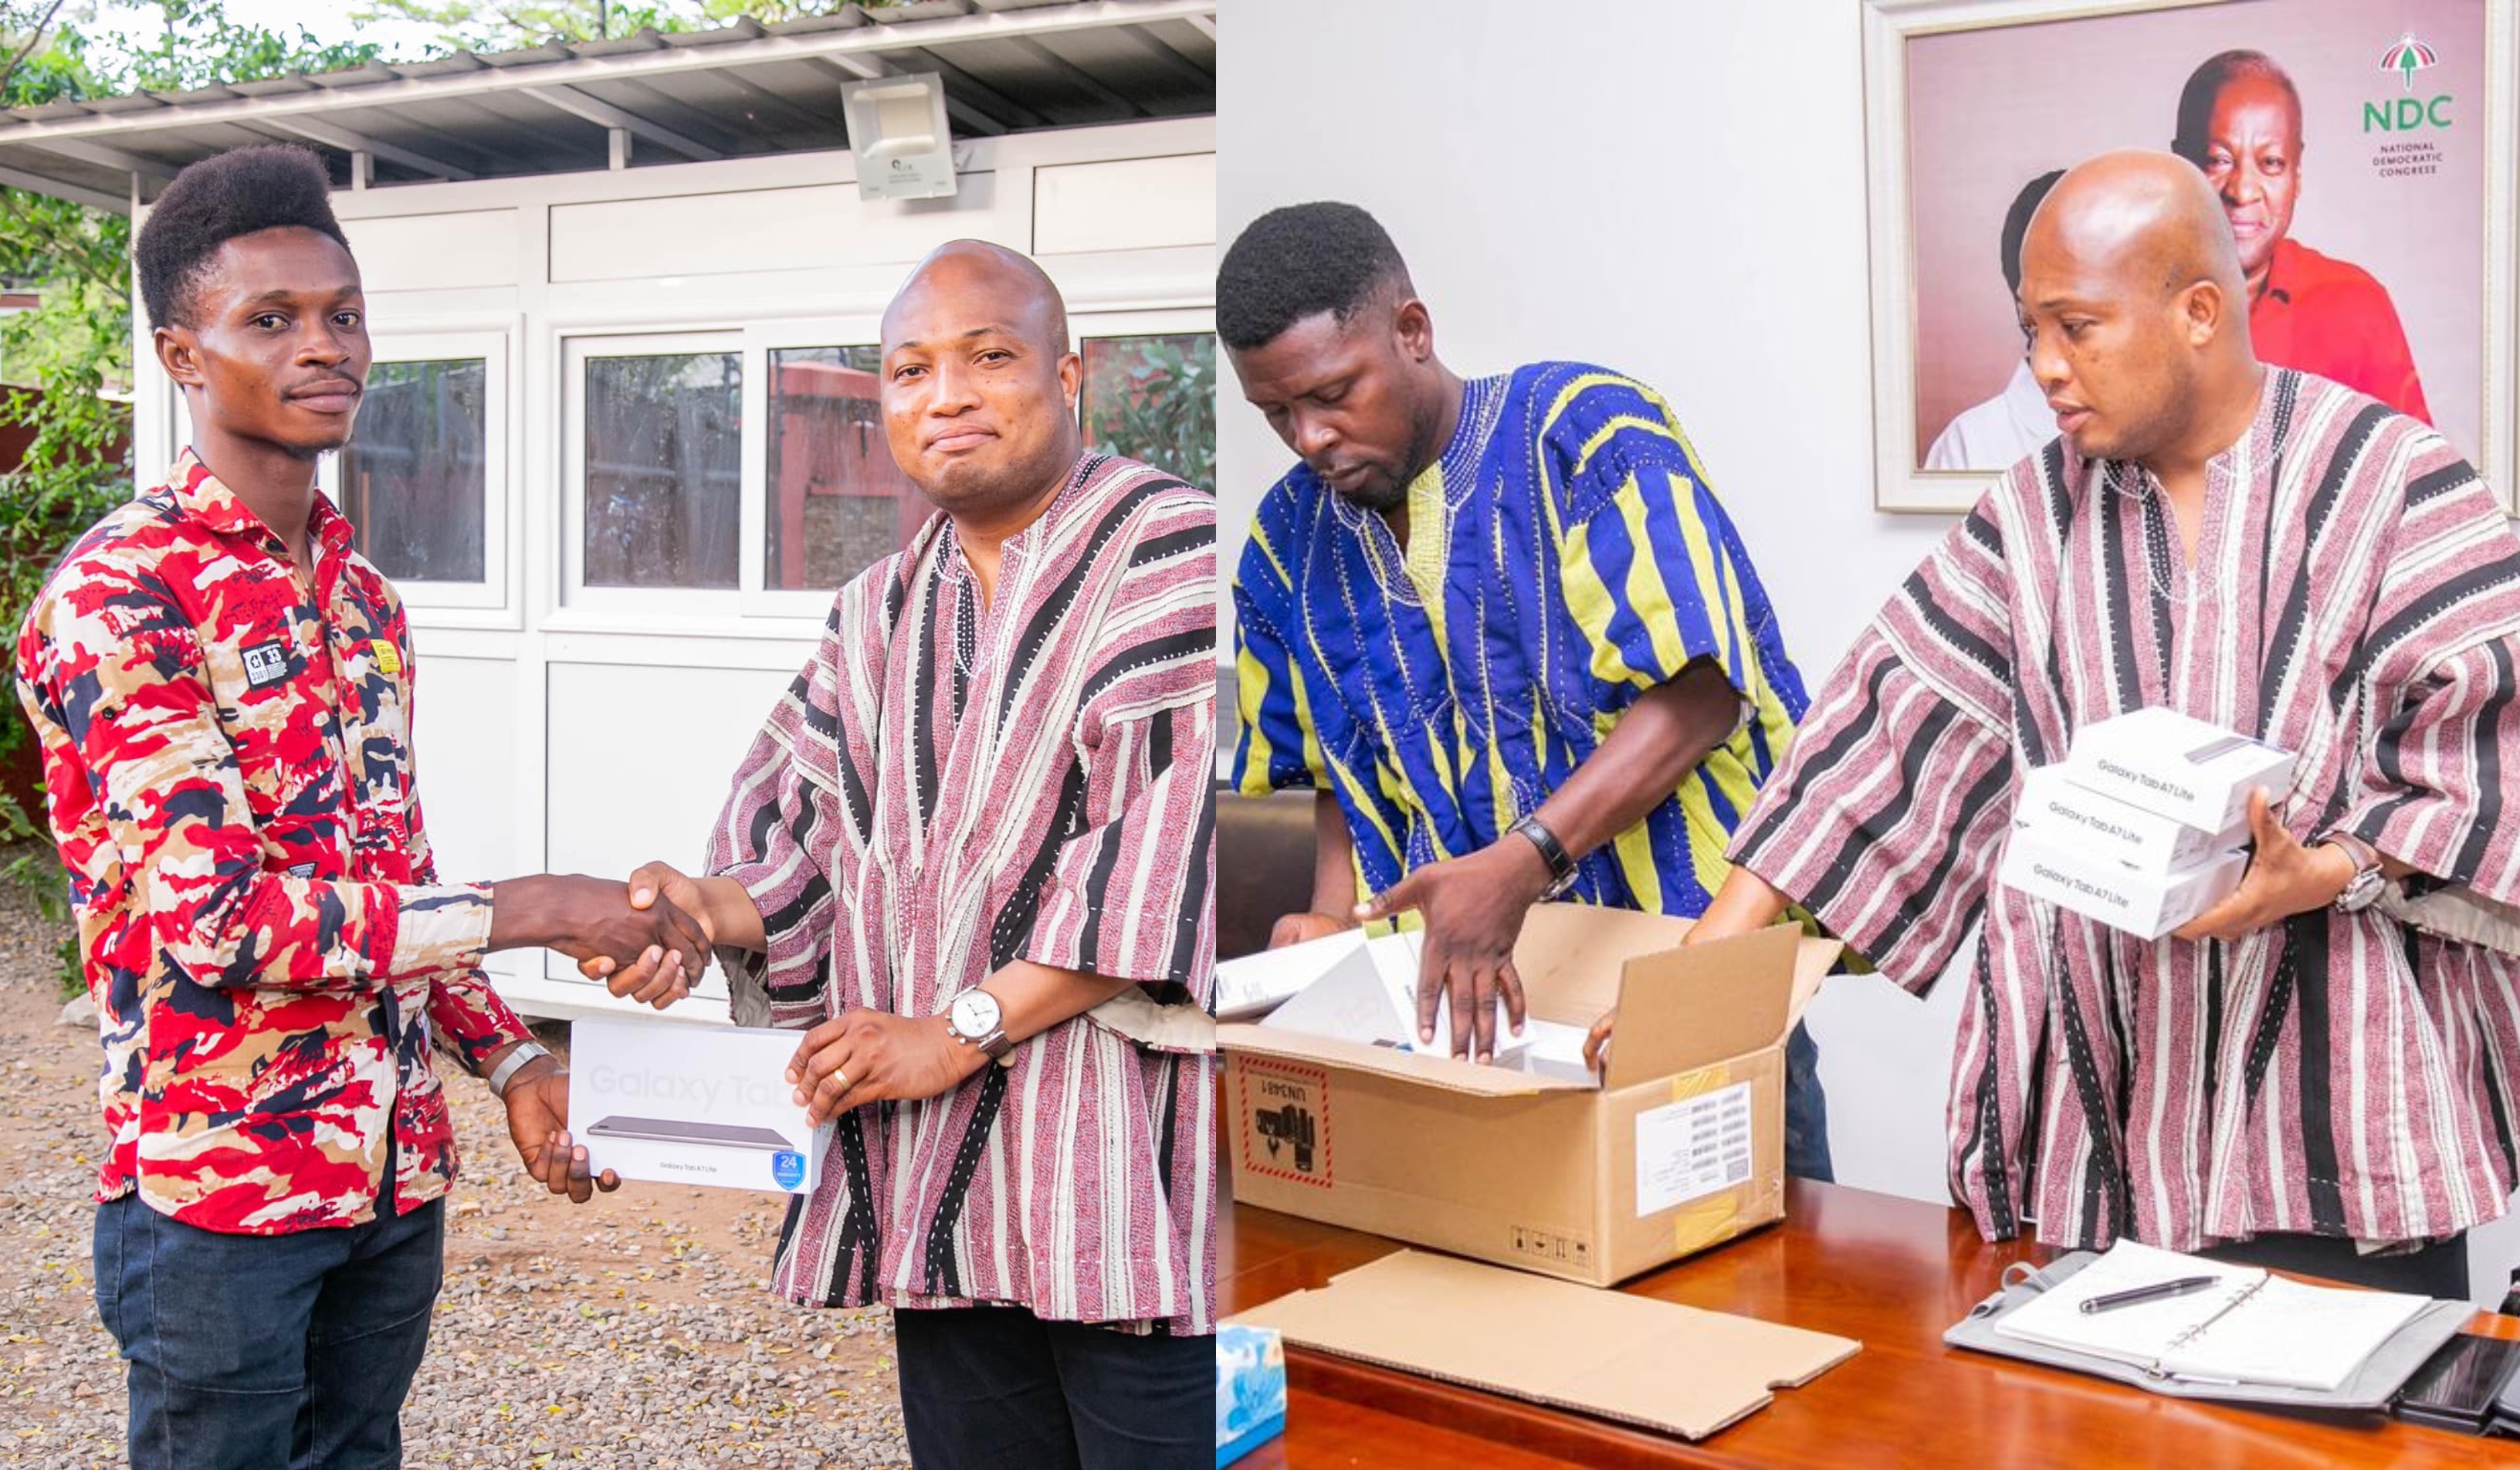 Ablakwa gives Samsung Galaxy Tablets to teachers in his constituency